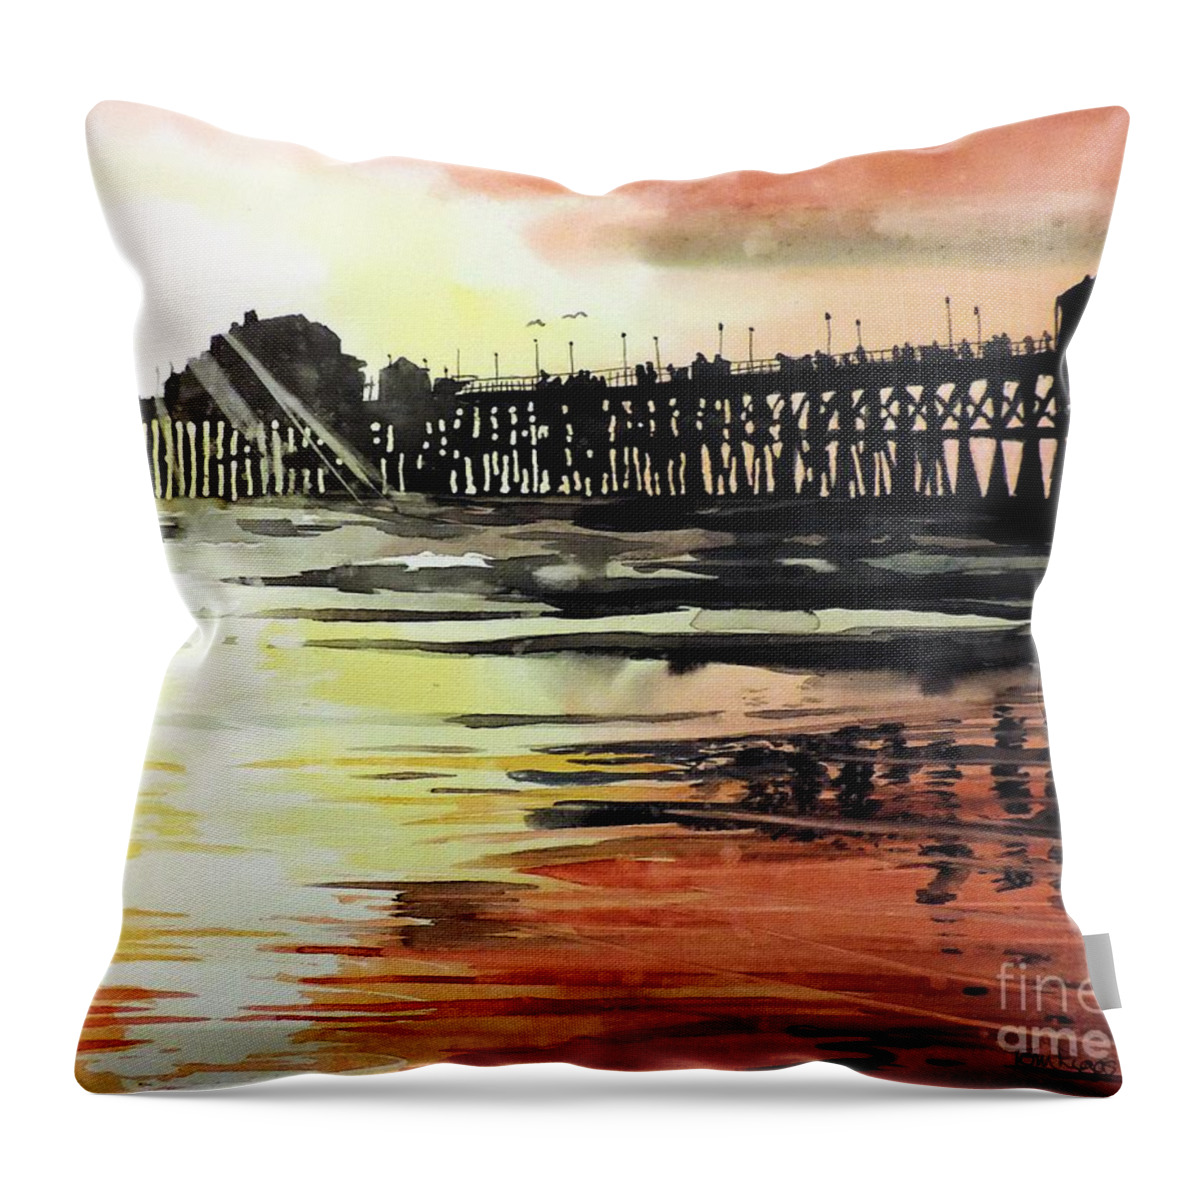 Sunset Throw Pillow featuring the painting Sunset Oceanside Pier by Tom Riggs